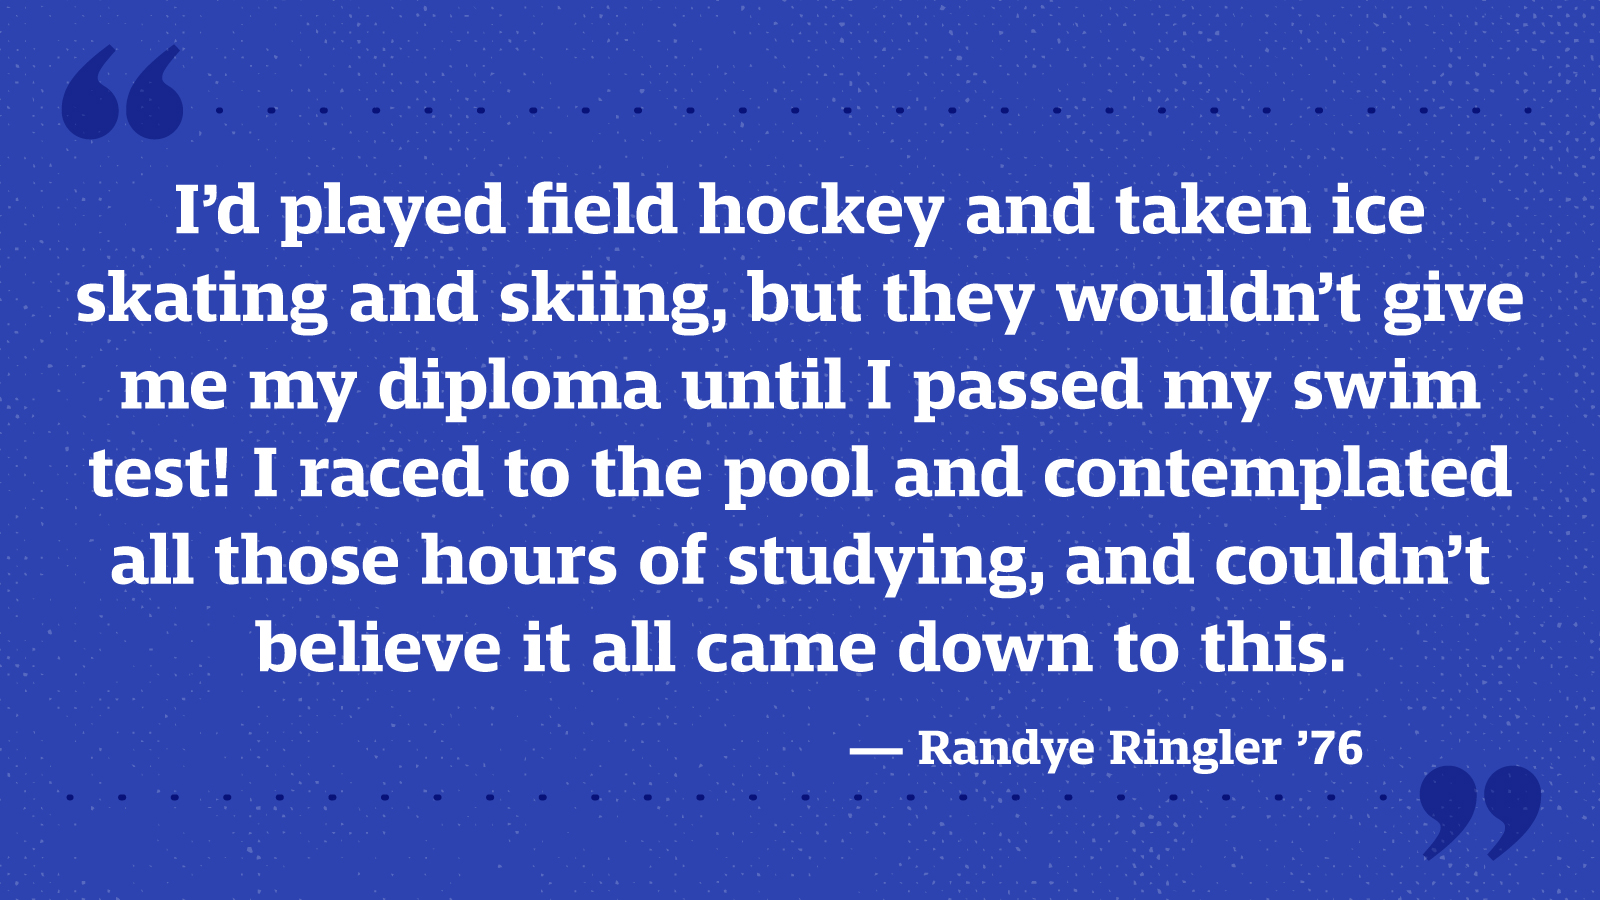 I’d played field hockey and taken ice skating and skiing, but they wouldn’t give me my diploma until I passed my swim test! I raced to the pool and contemplated all those hours of studying, and couldn’t believe it all came down to this. — Randye Ringler ’76